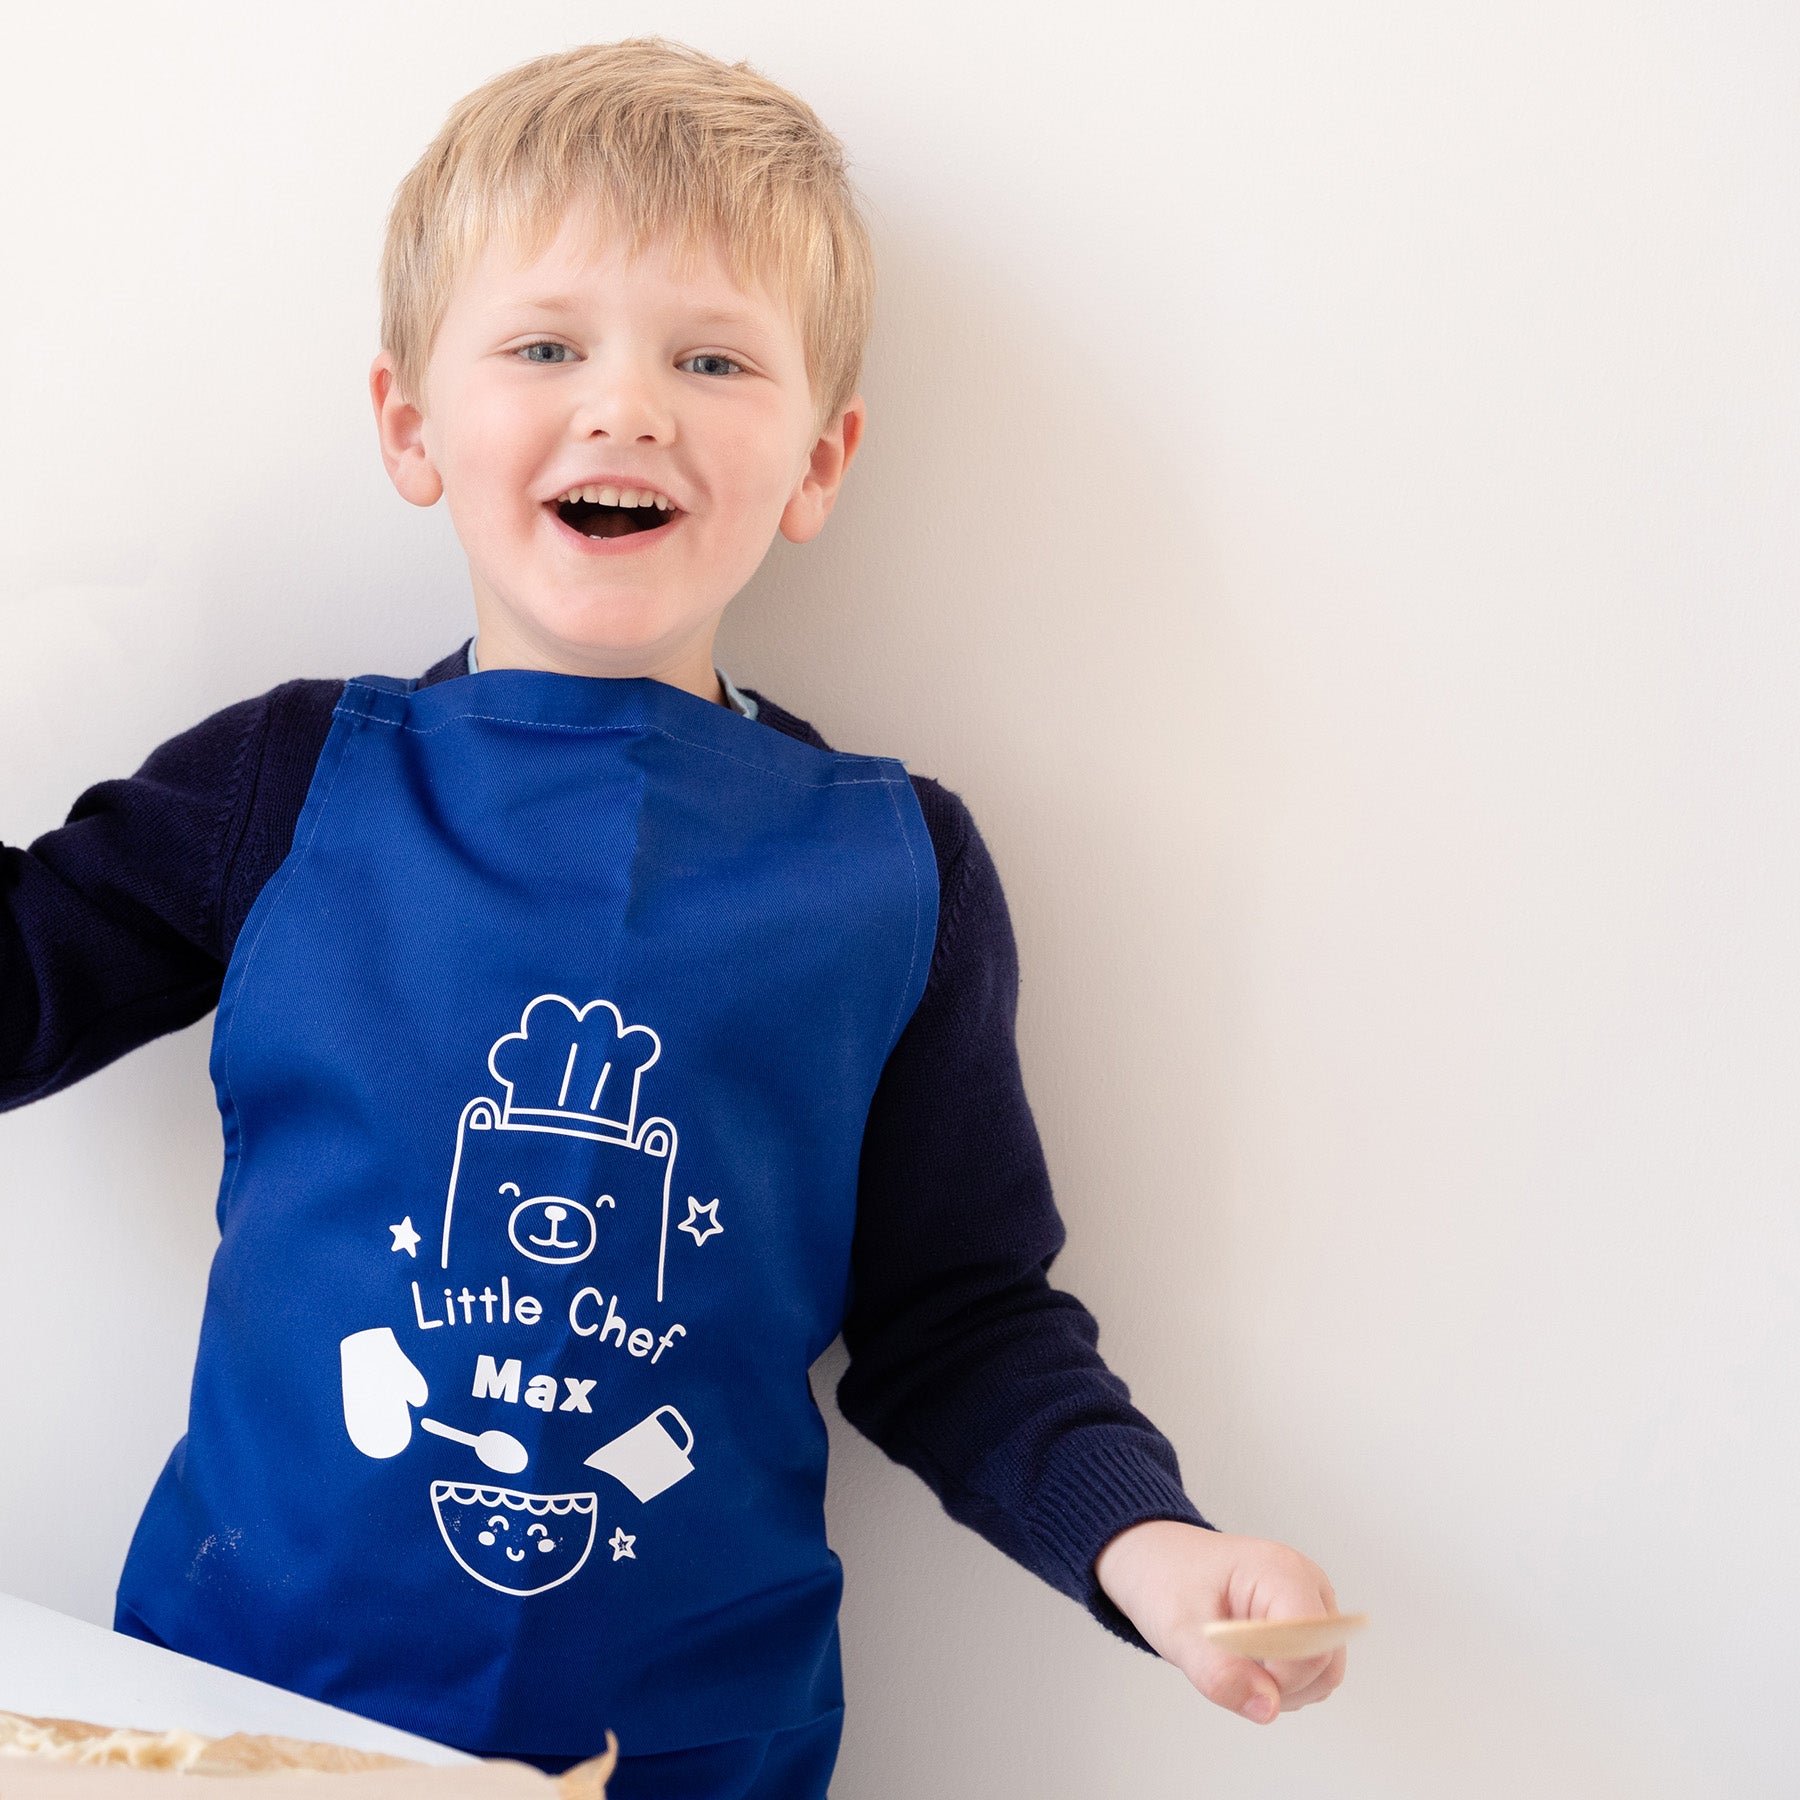 Aprons & Accessories for Kids